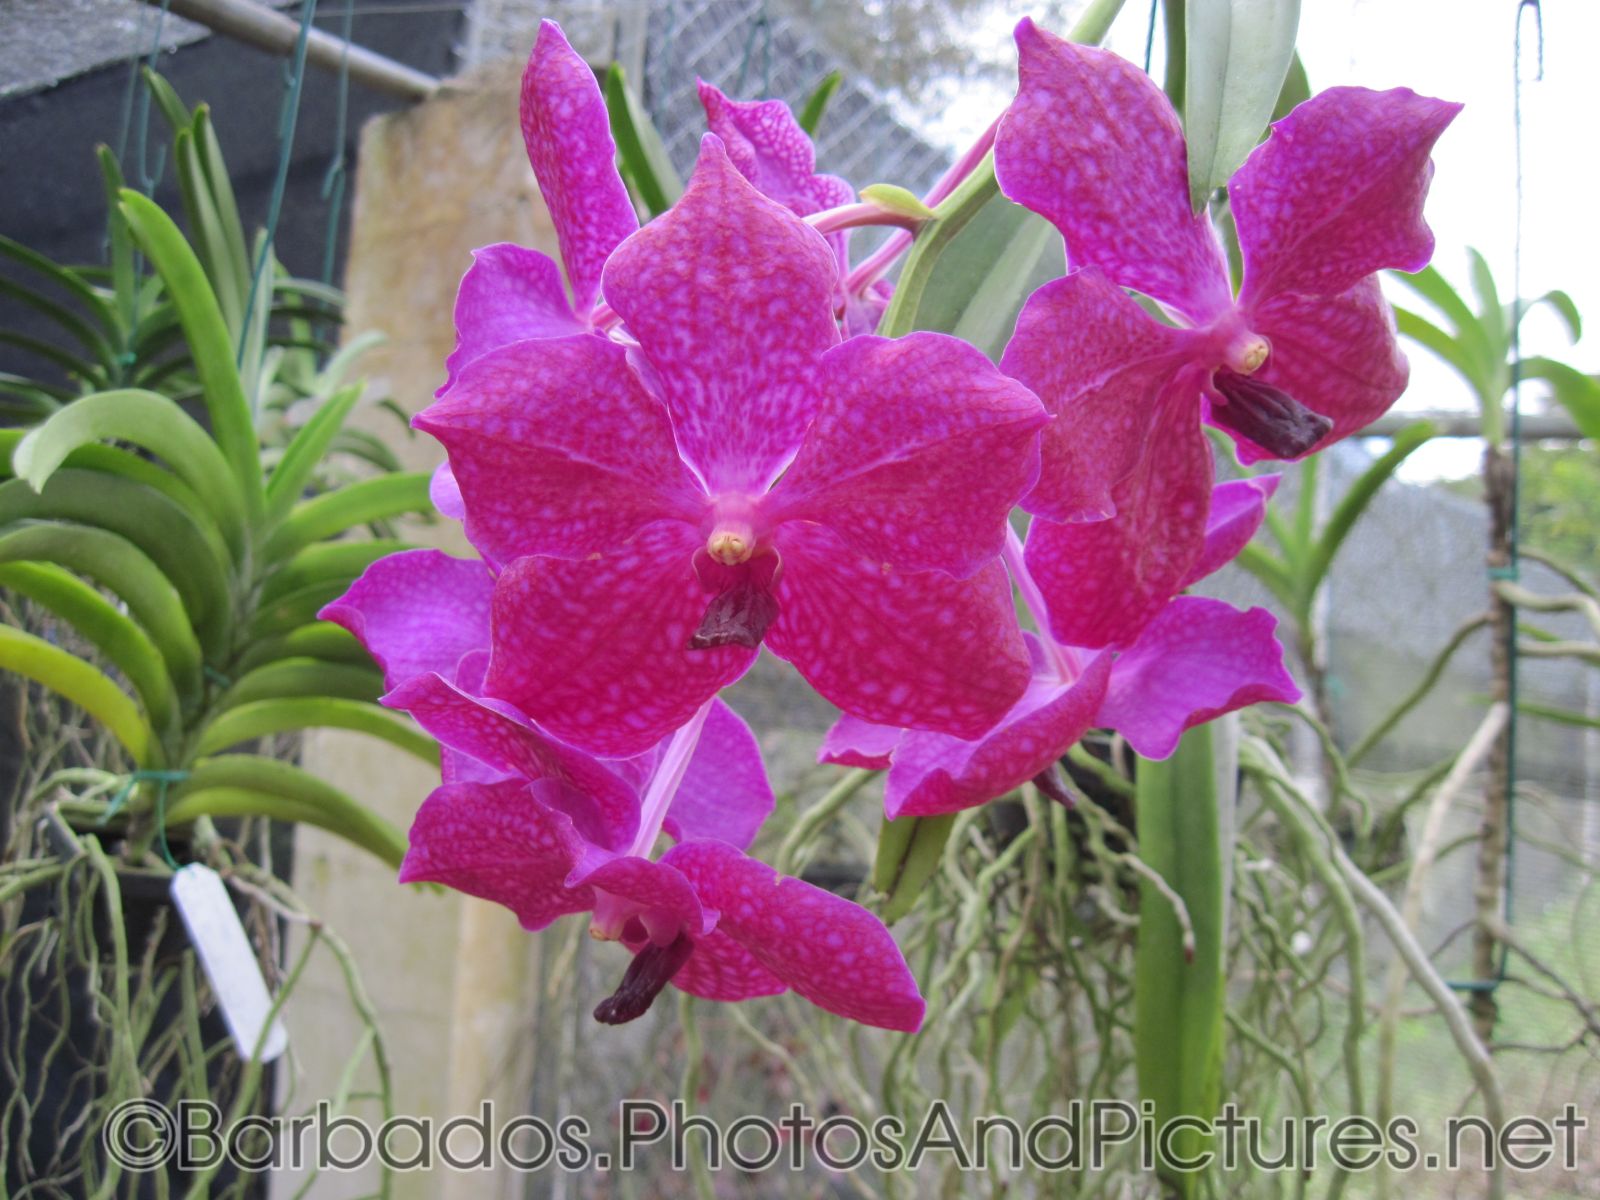 Close up of hot pink orchid with white spots at Orchid World Barbados.jpg
